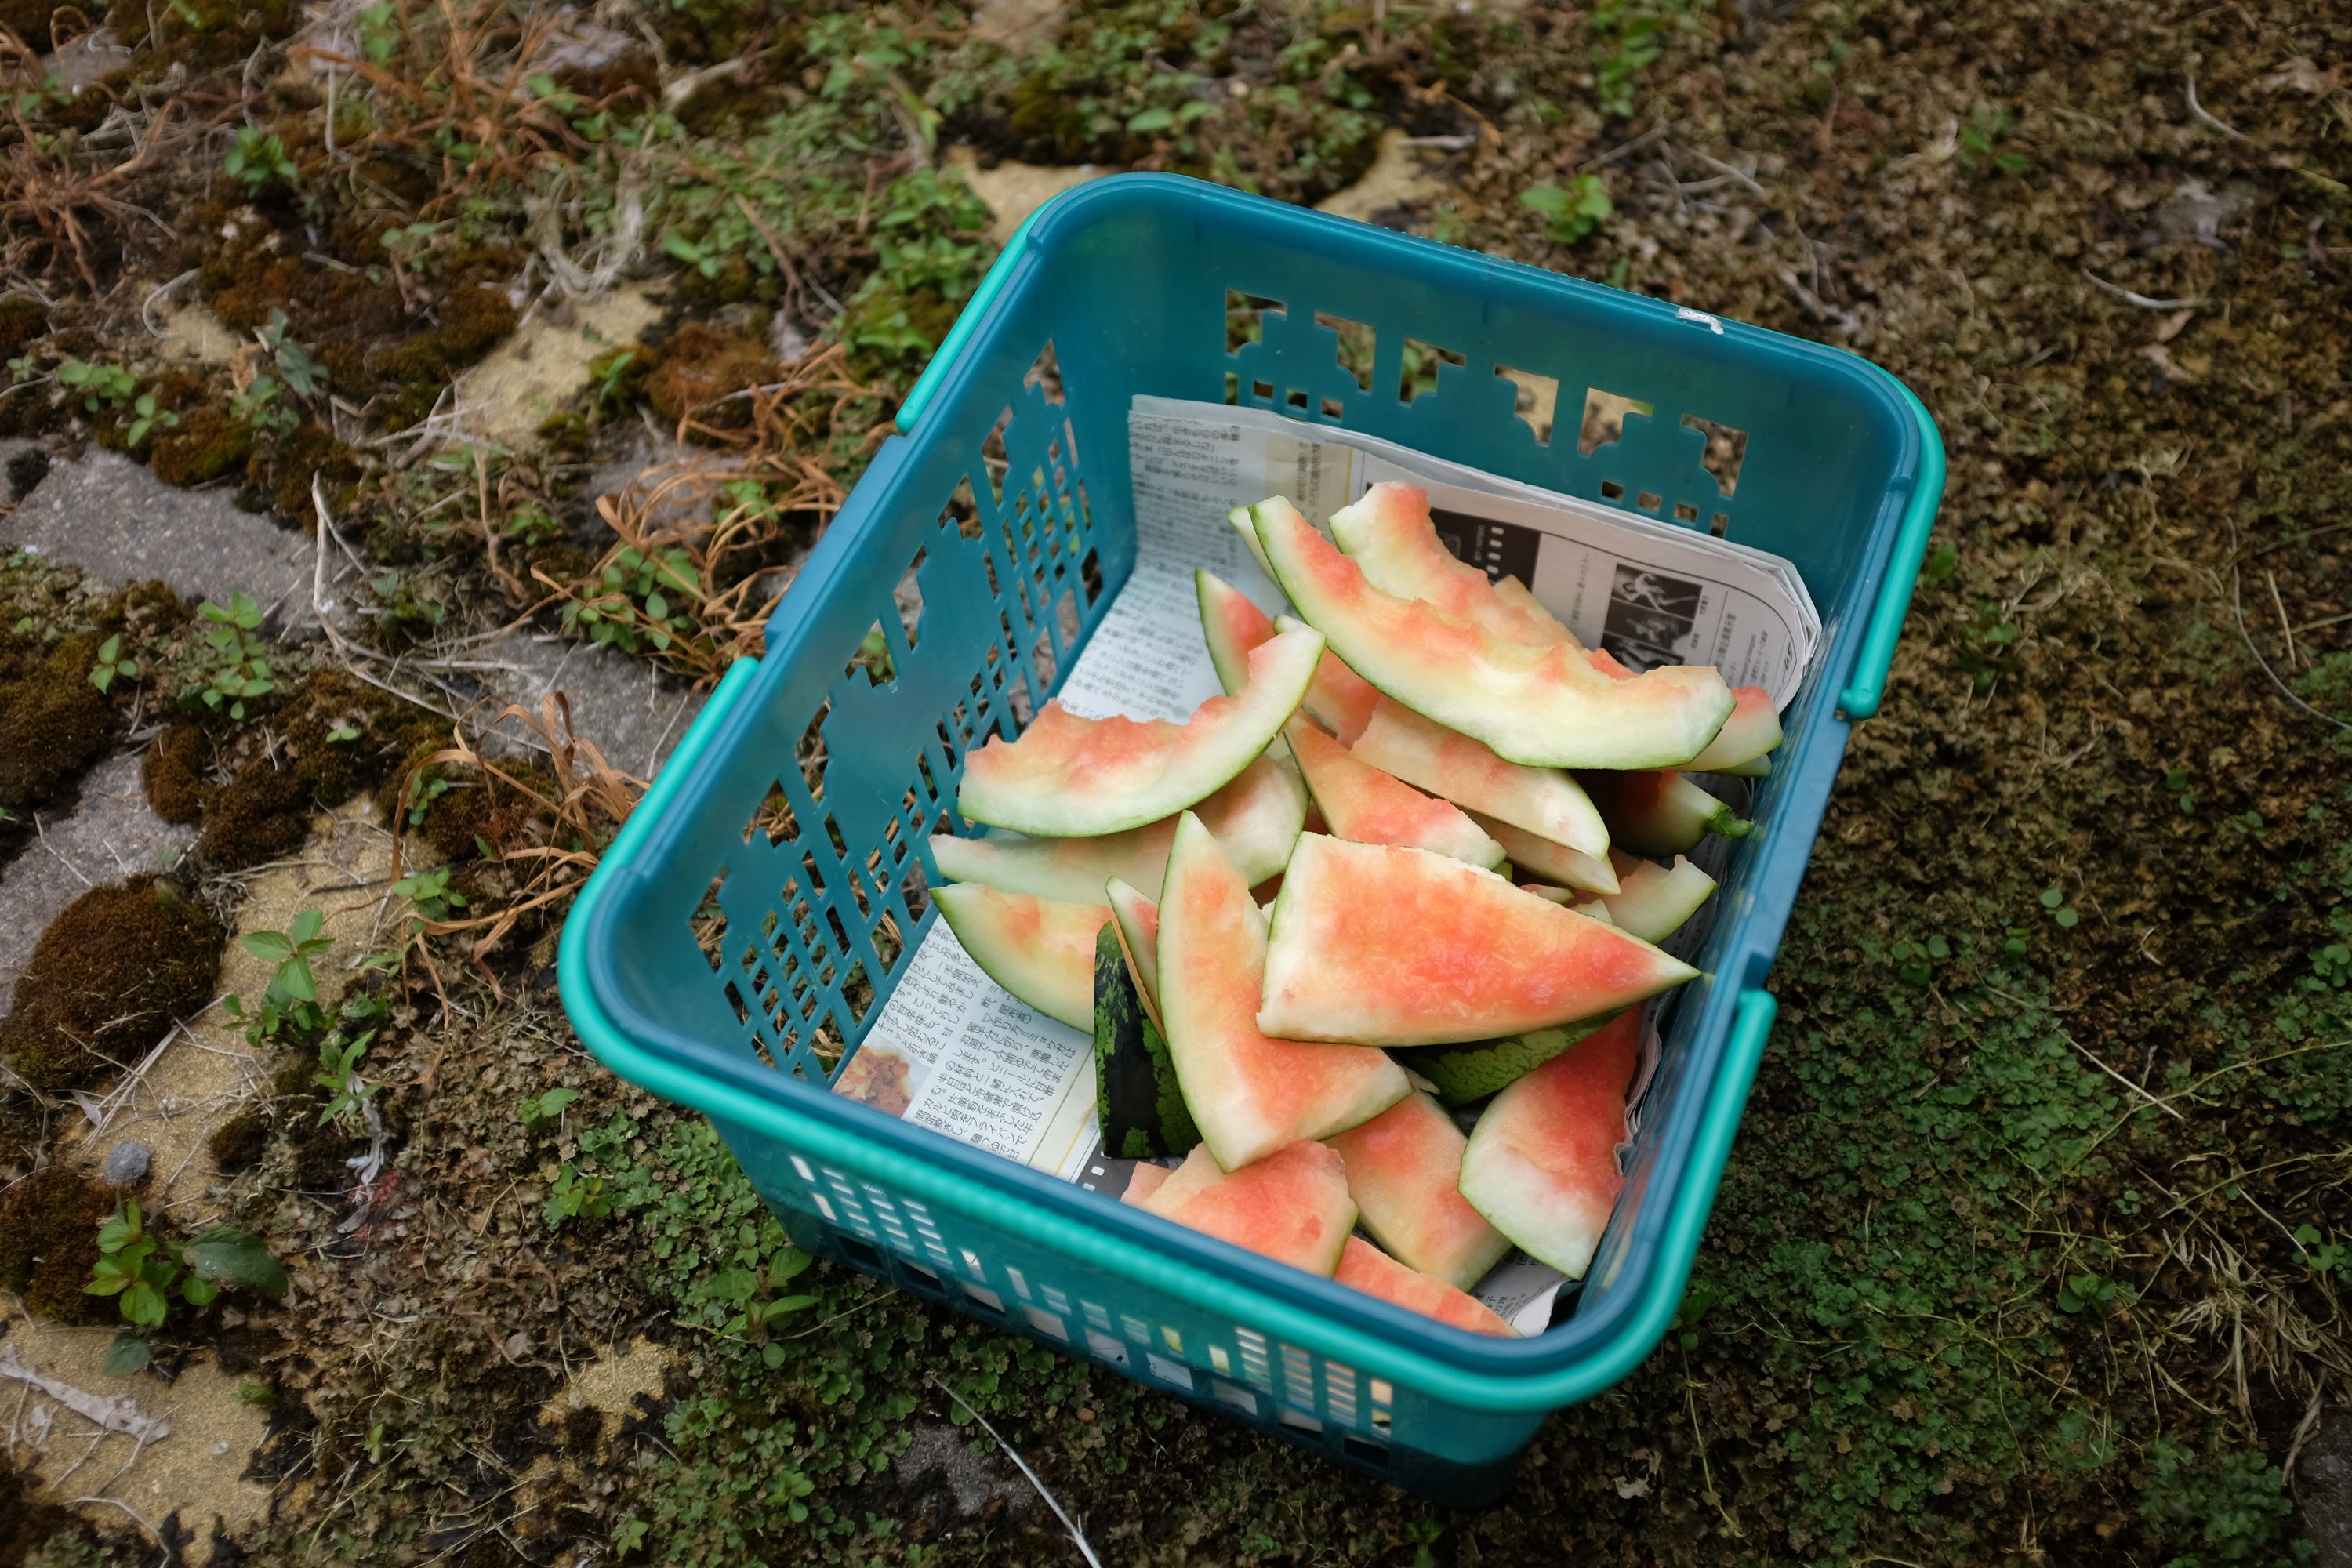 A blue-green plastic shopping basket filled with melon rinds.